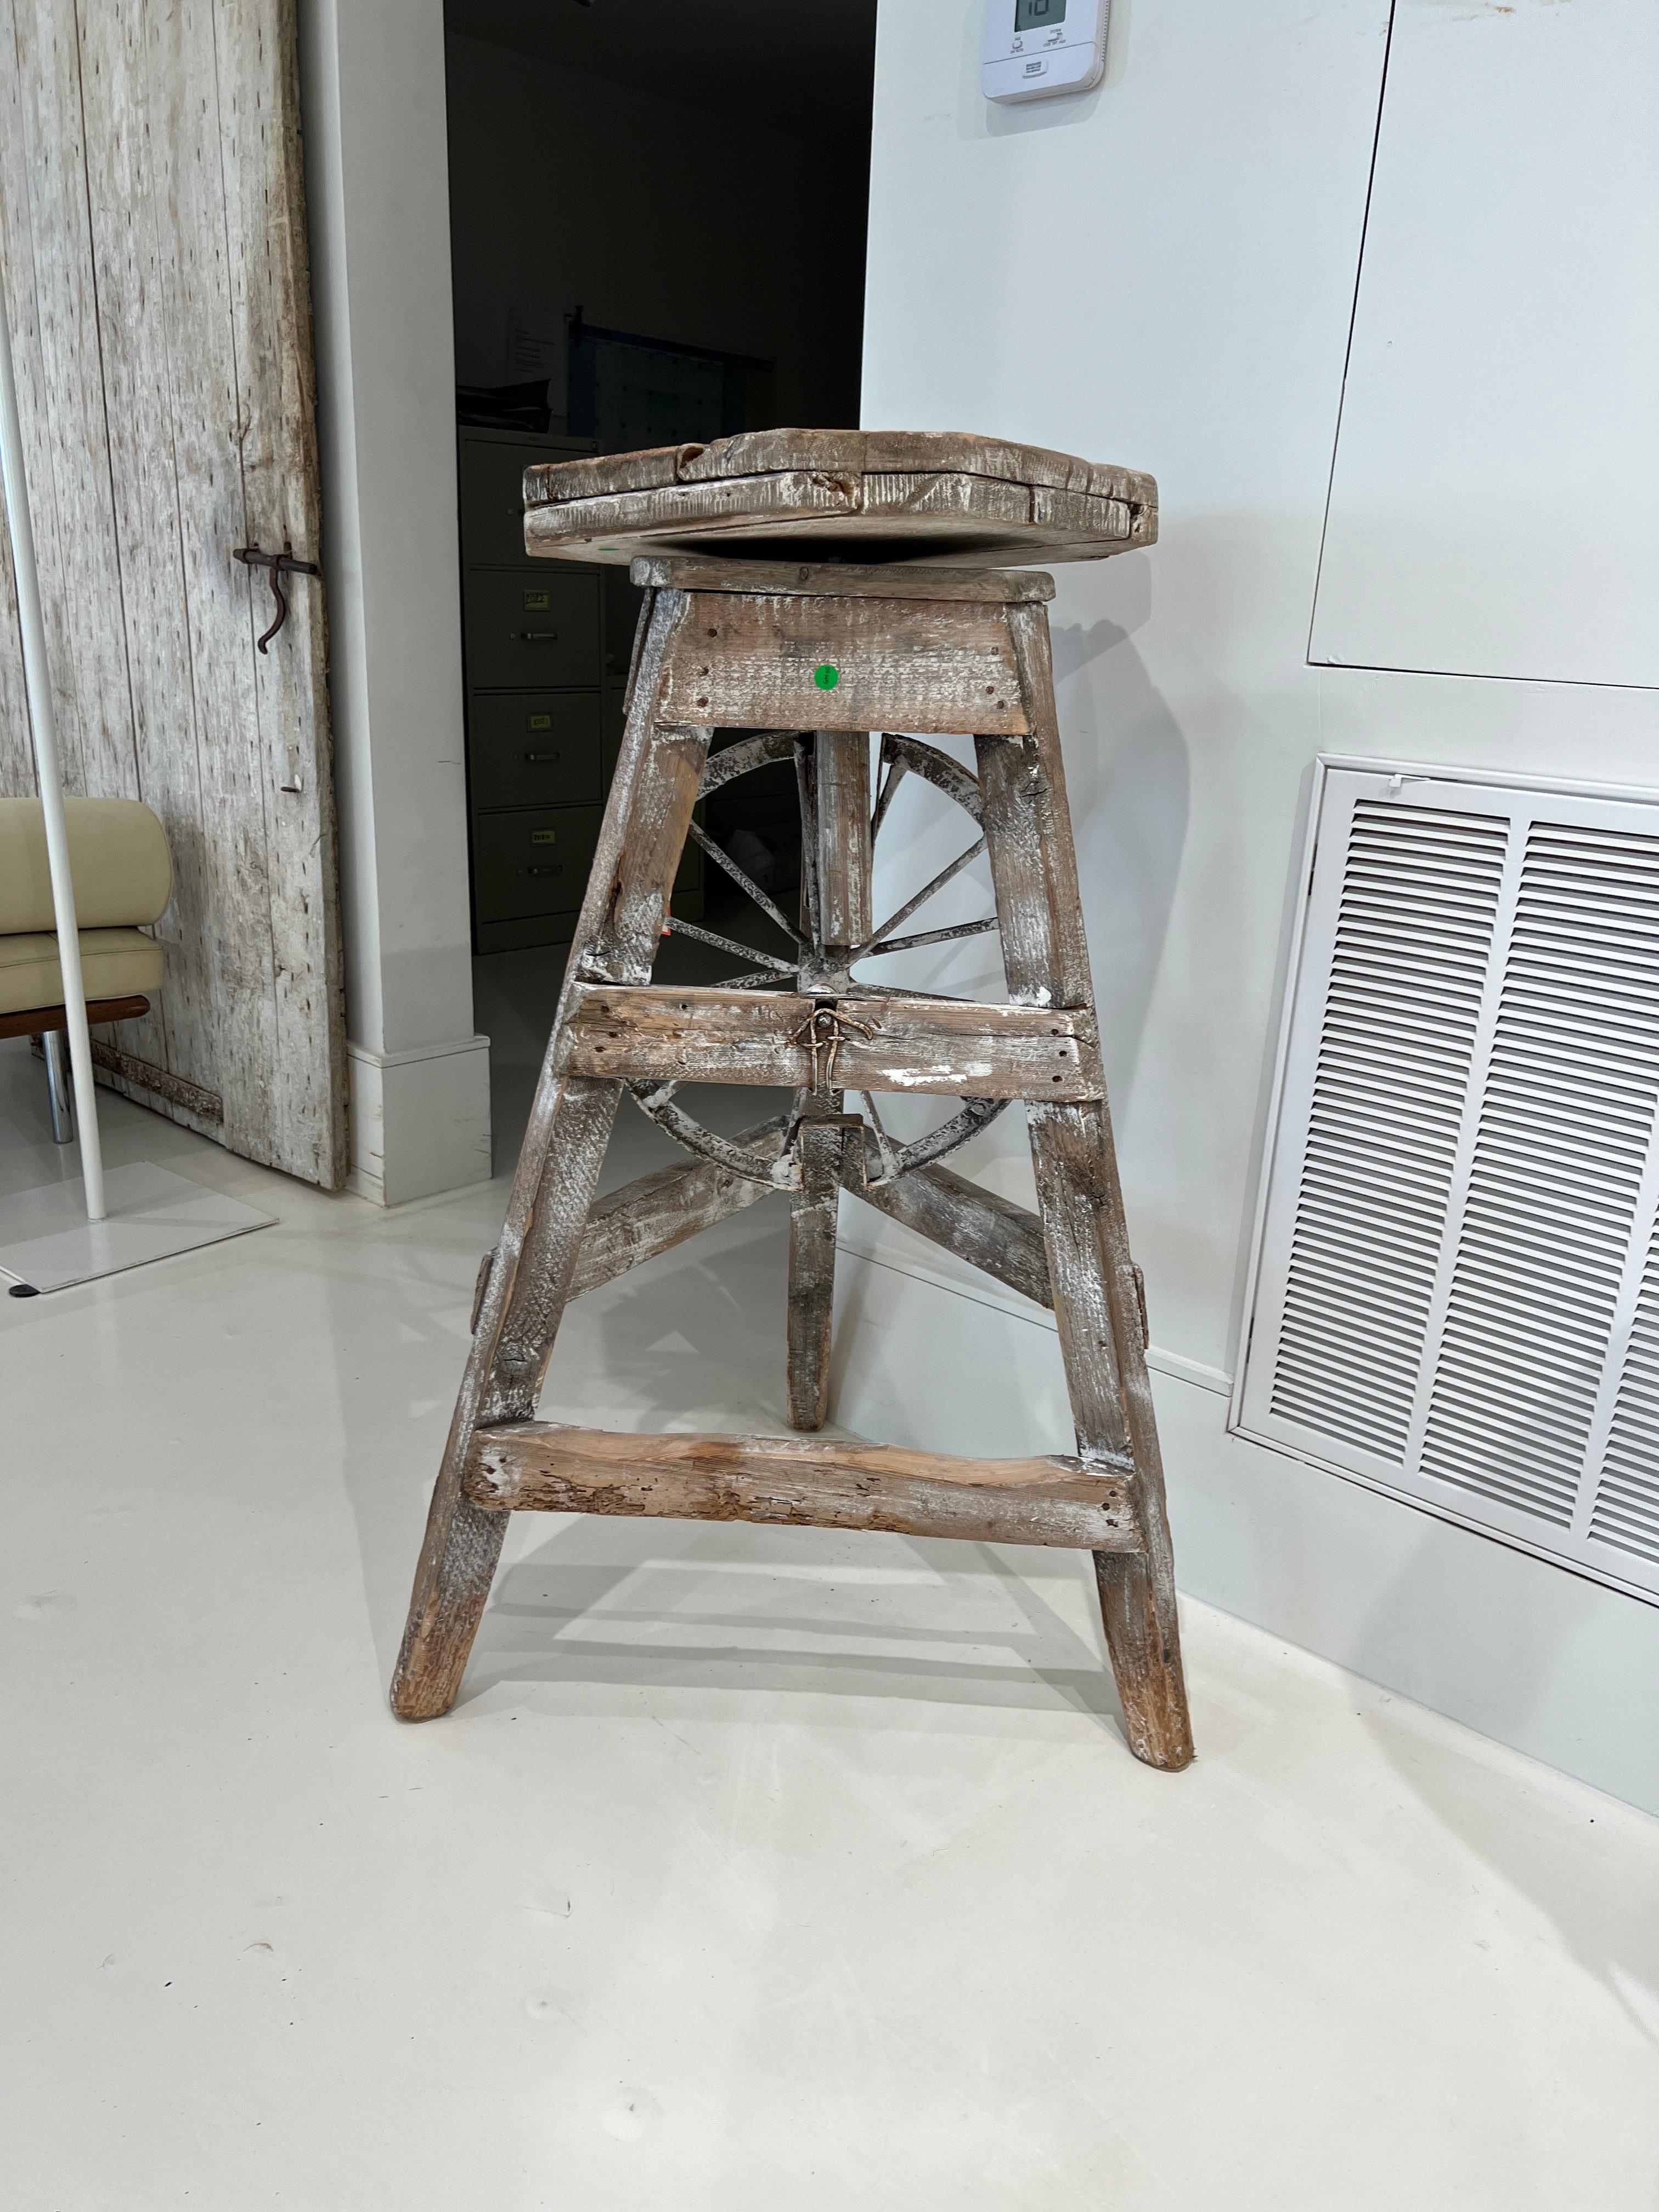 An authentic wooden stand for creating sculptures.  Splattered with paint and plaster, the stand looks like it came straight out of a working studio in Paris.